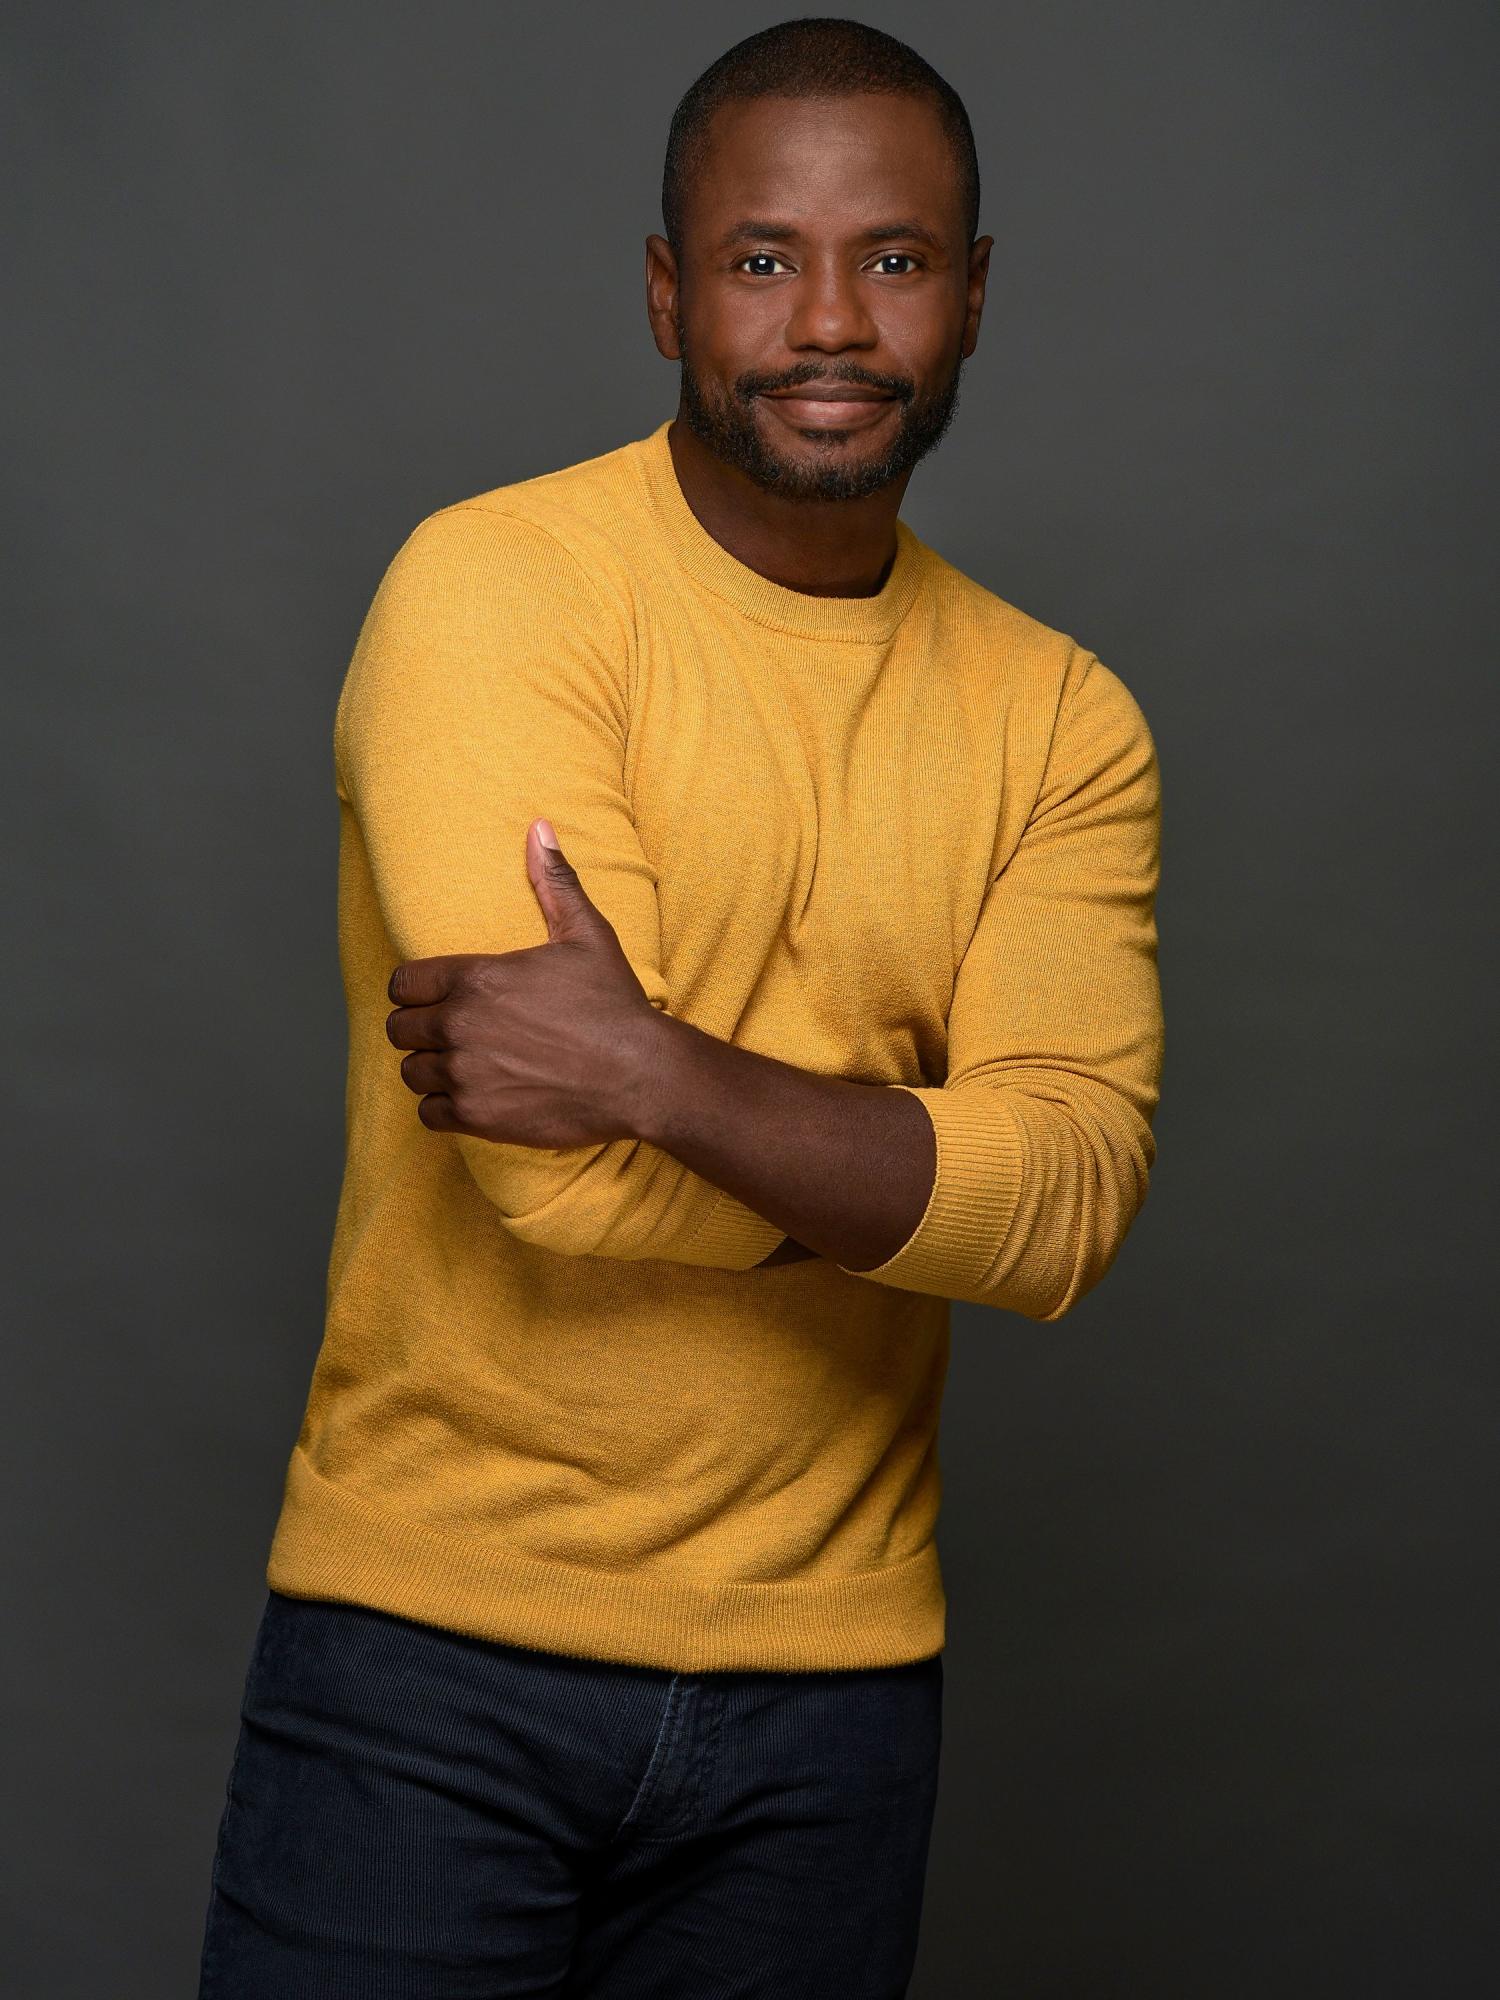 Black man with a yellow sweater posing casually